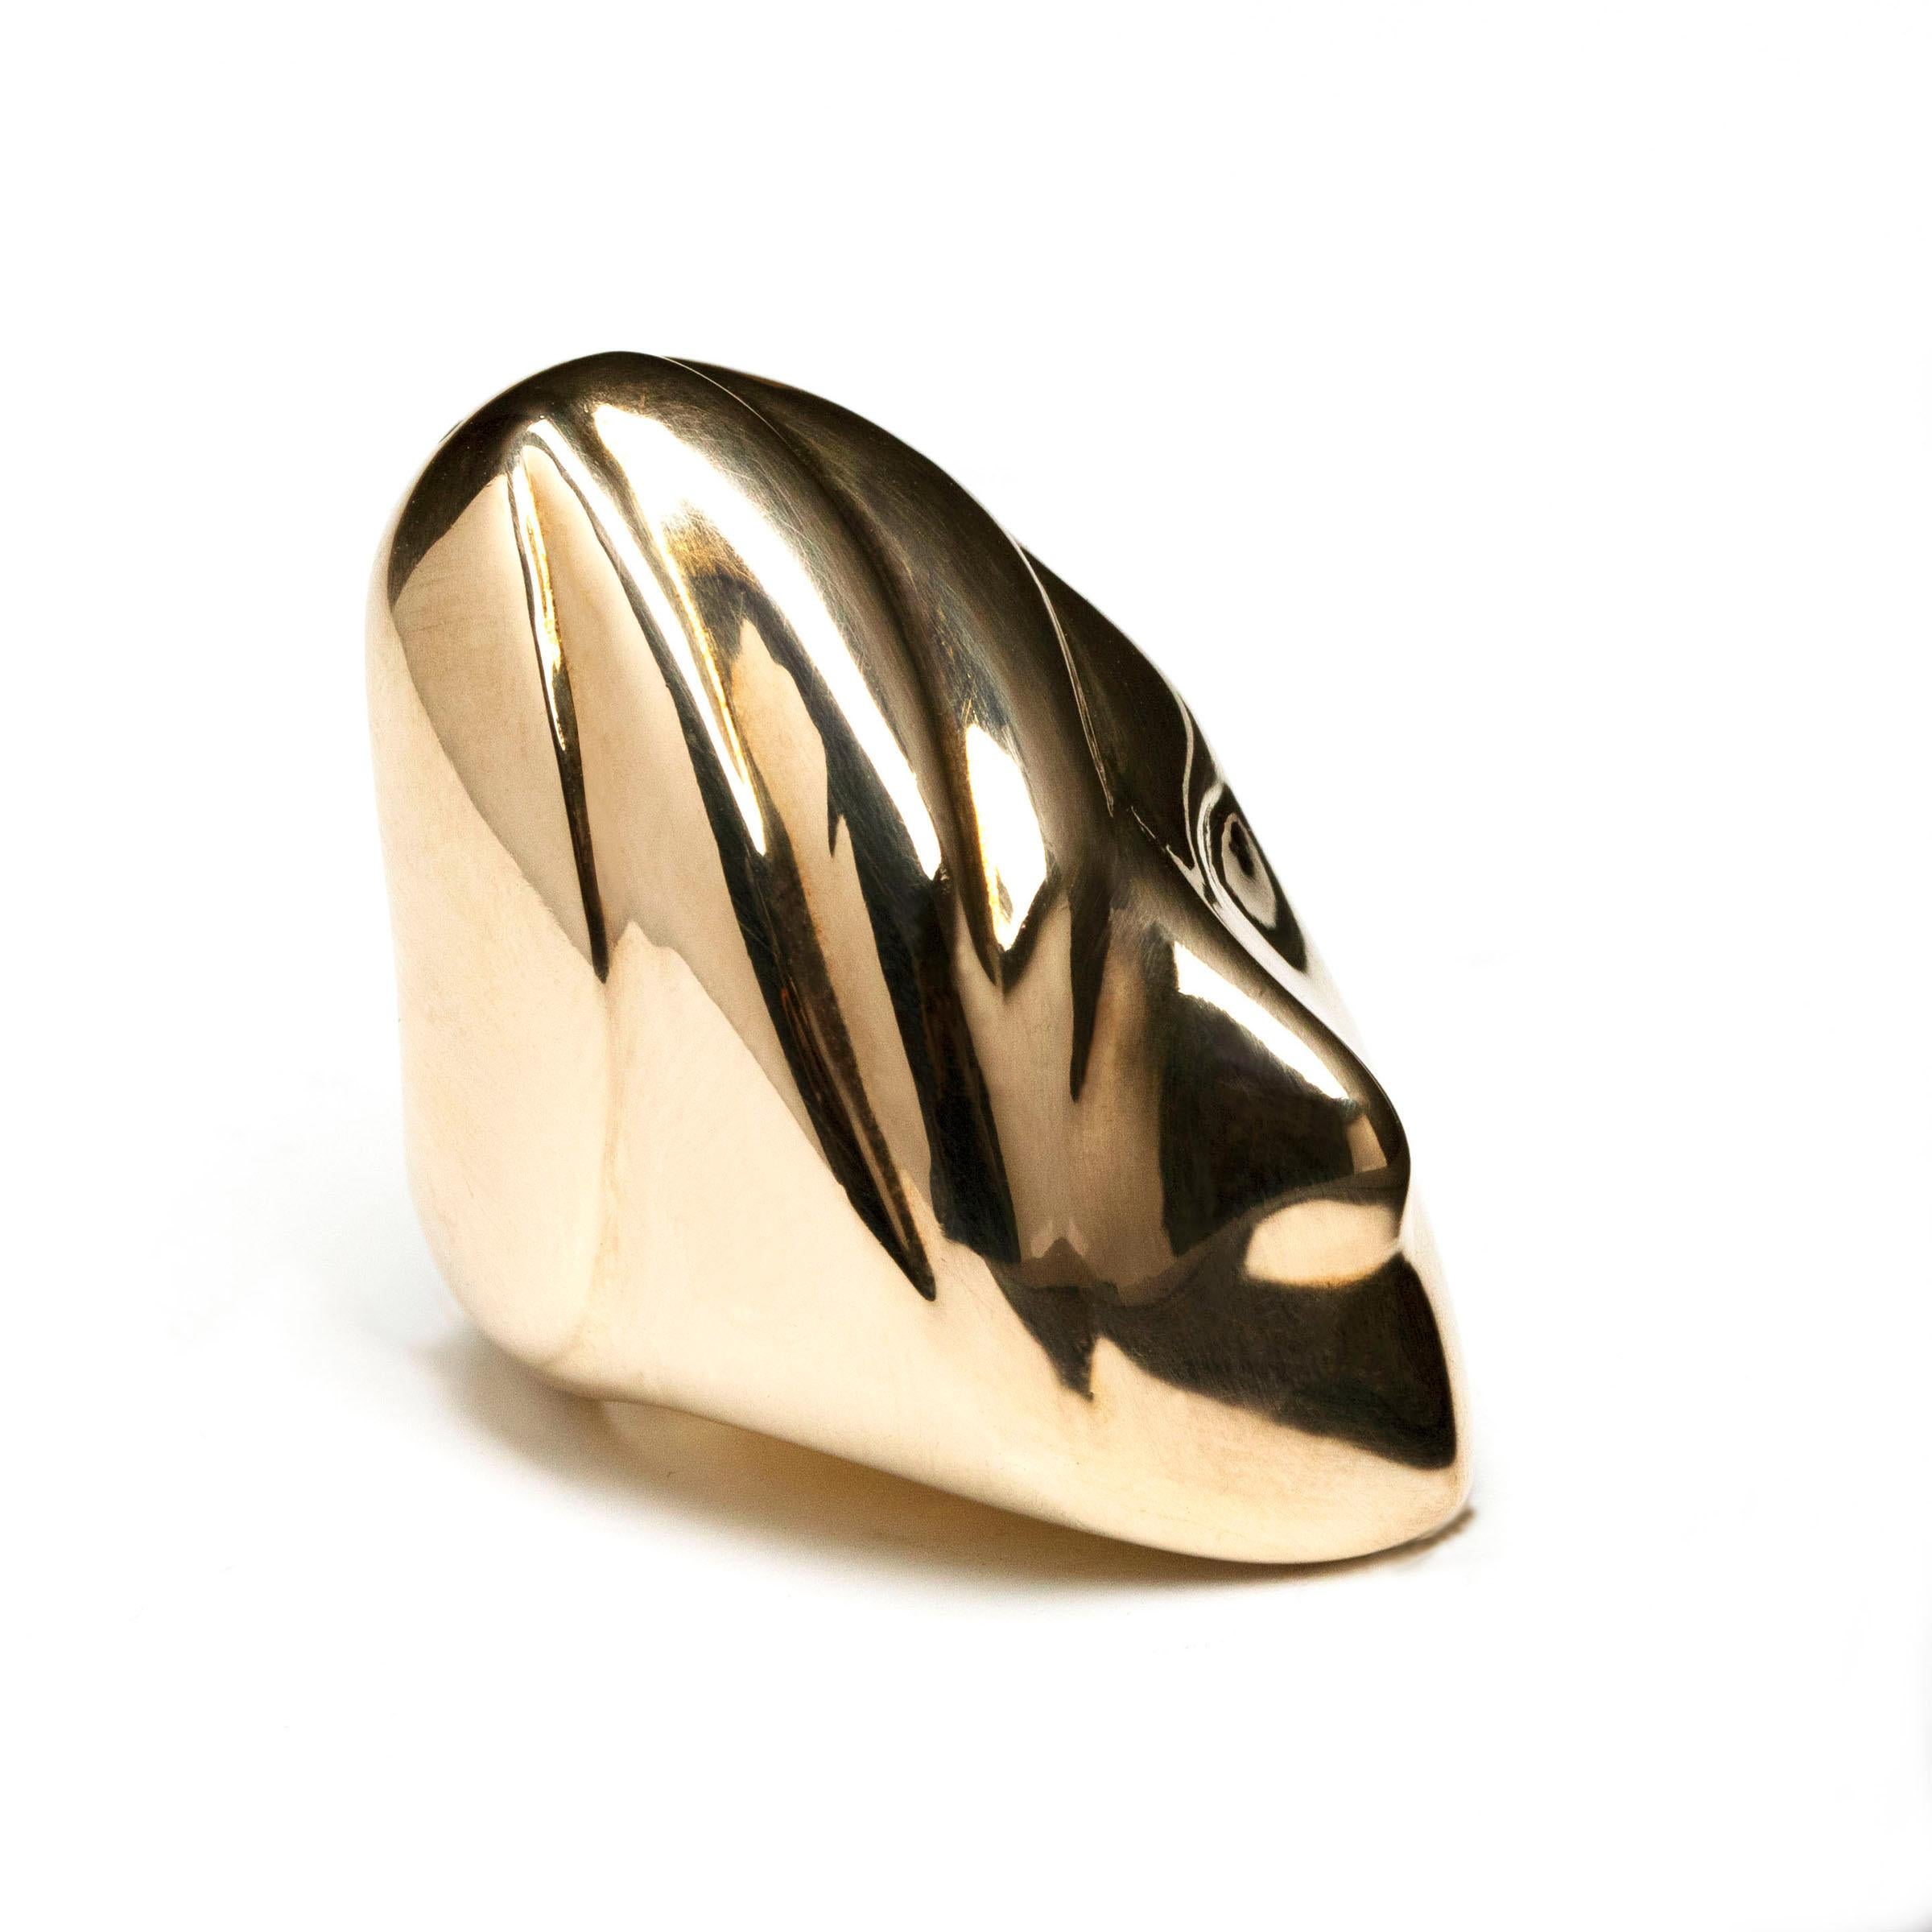 For Sale:  Brenna Colvin, Faces Collection, 'Jorgensen', Gold Plated Sterling Silver 2